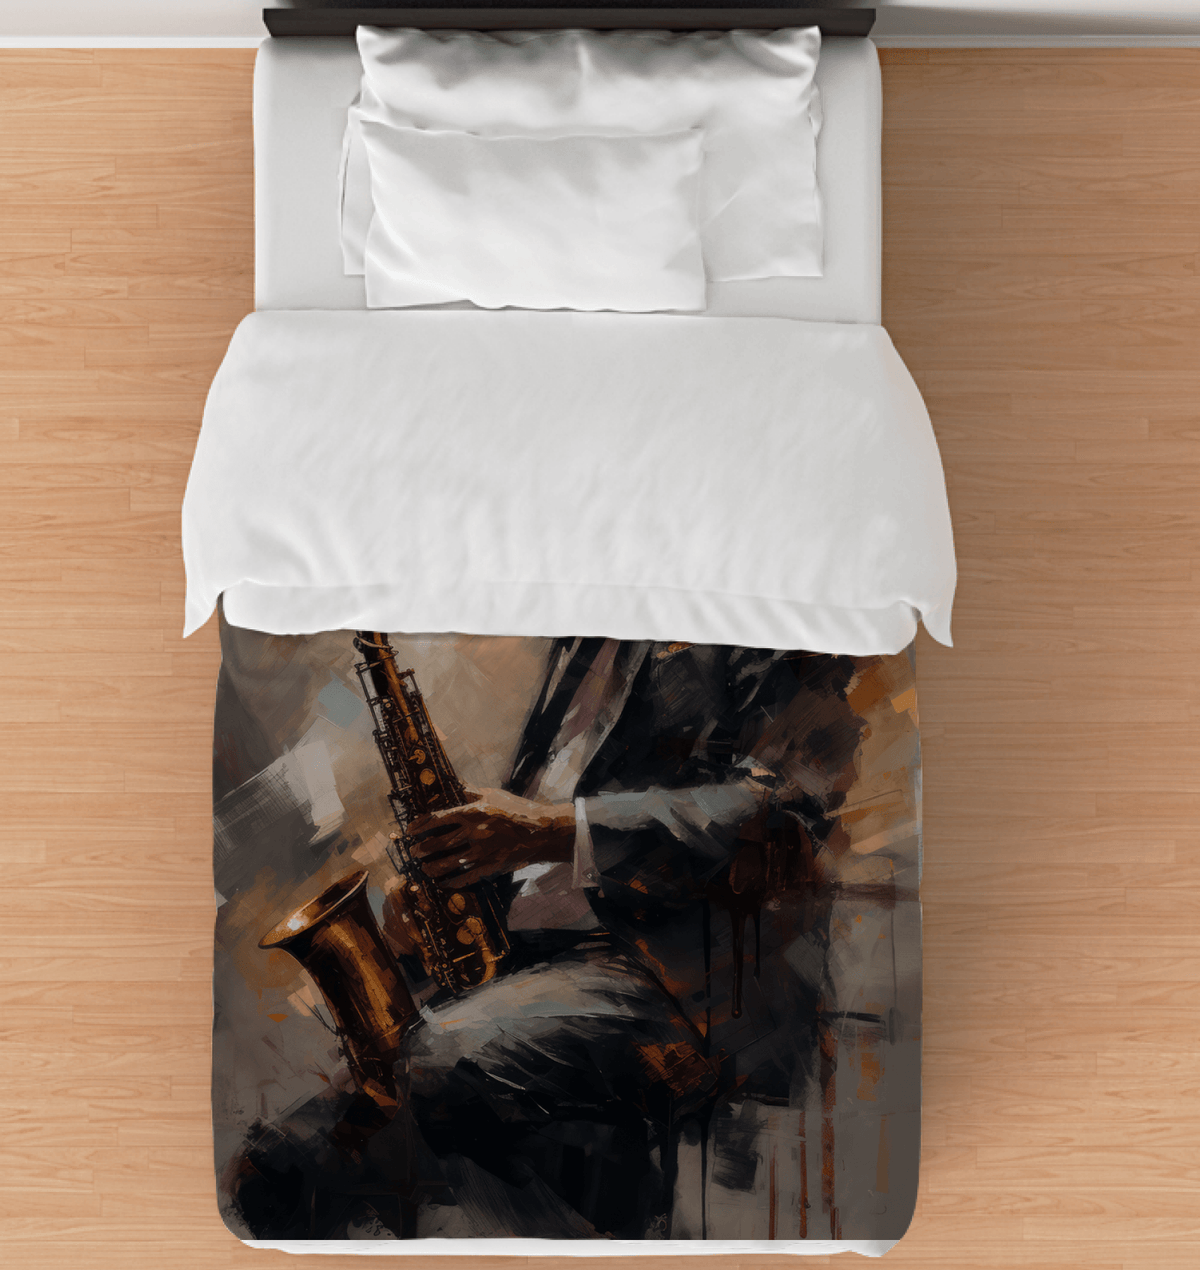 Beat Blast Comforter - Twin size with musical note design on a cozy bedding.